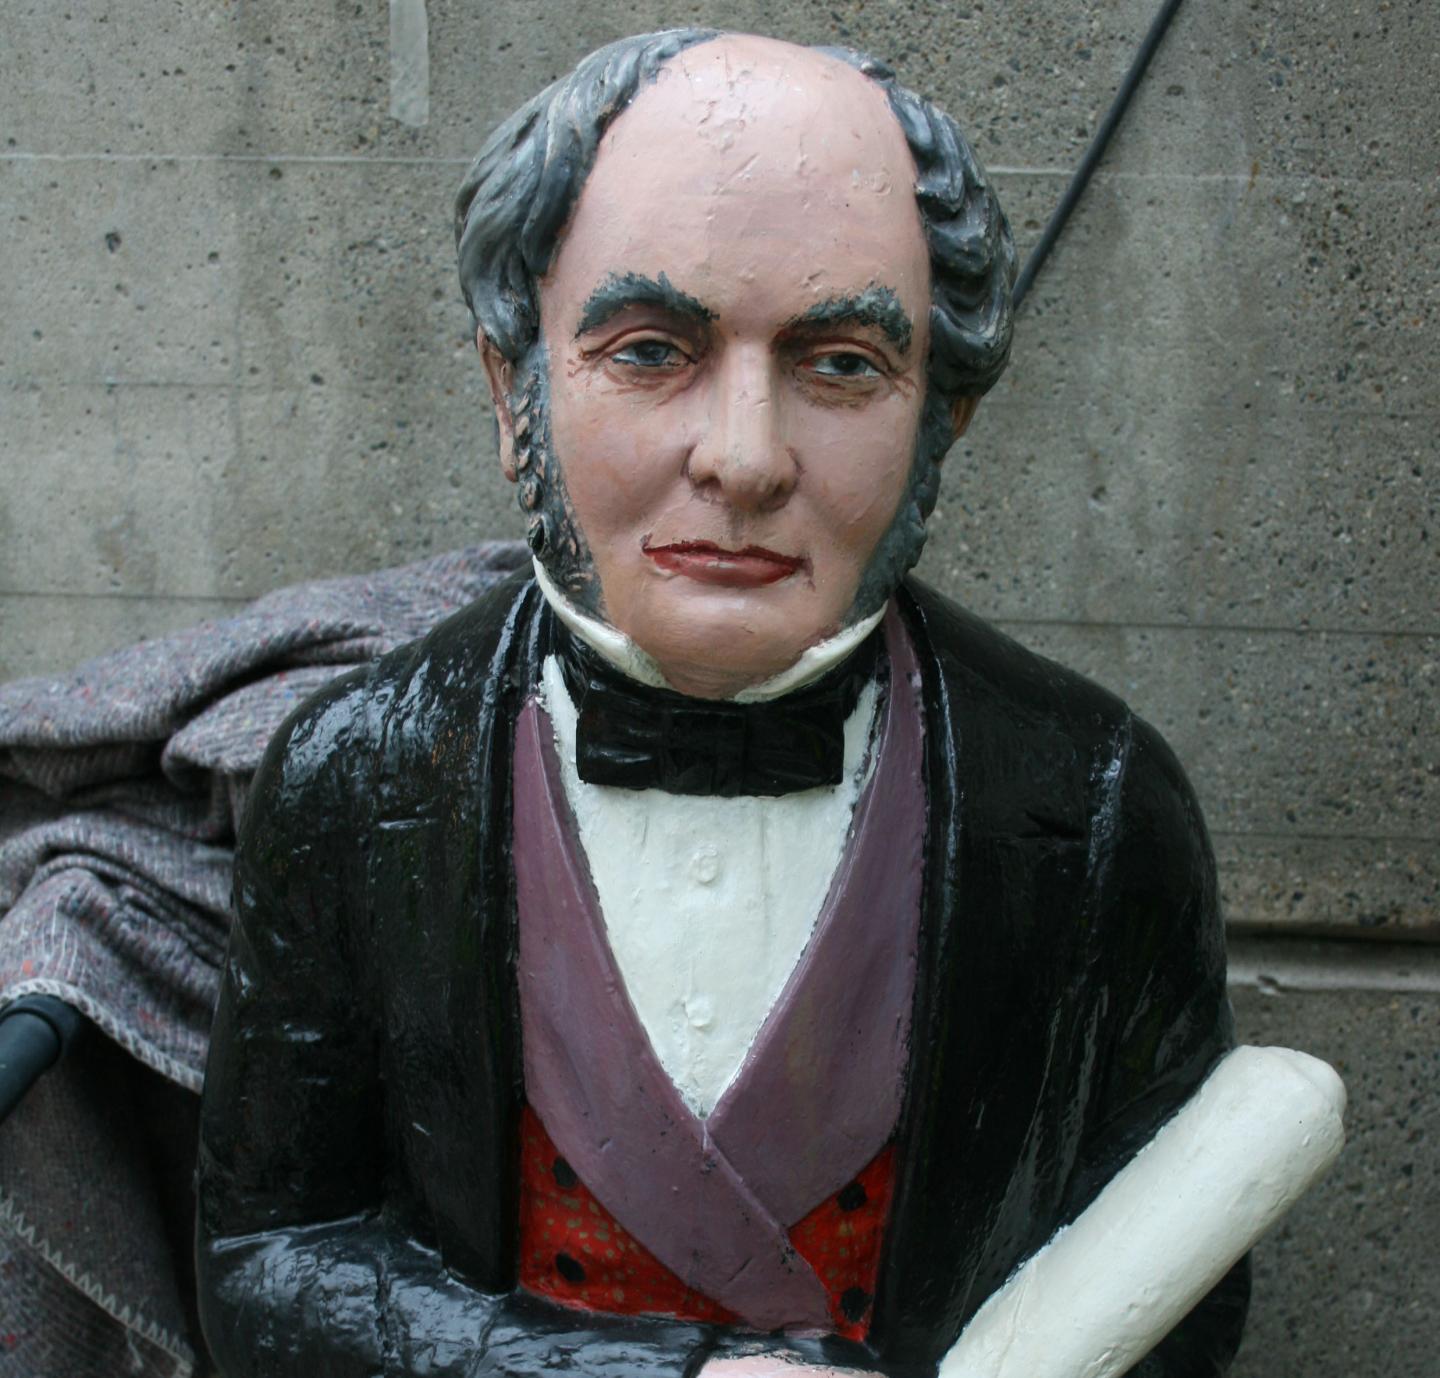 Gladstone, part of the figurehead collection at Cutty Sark